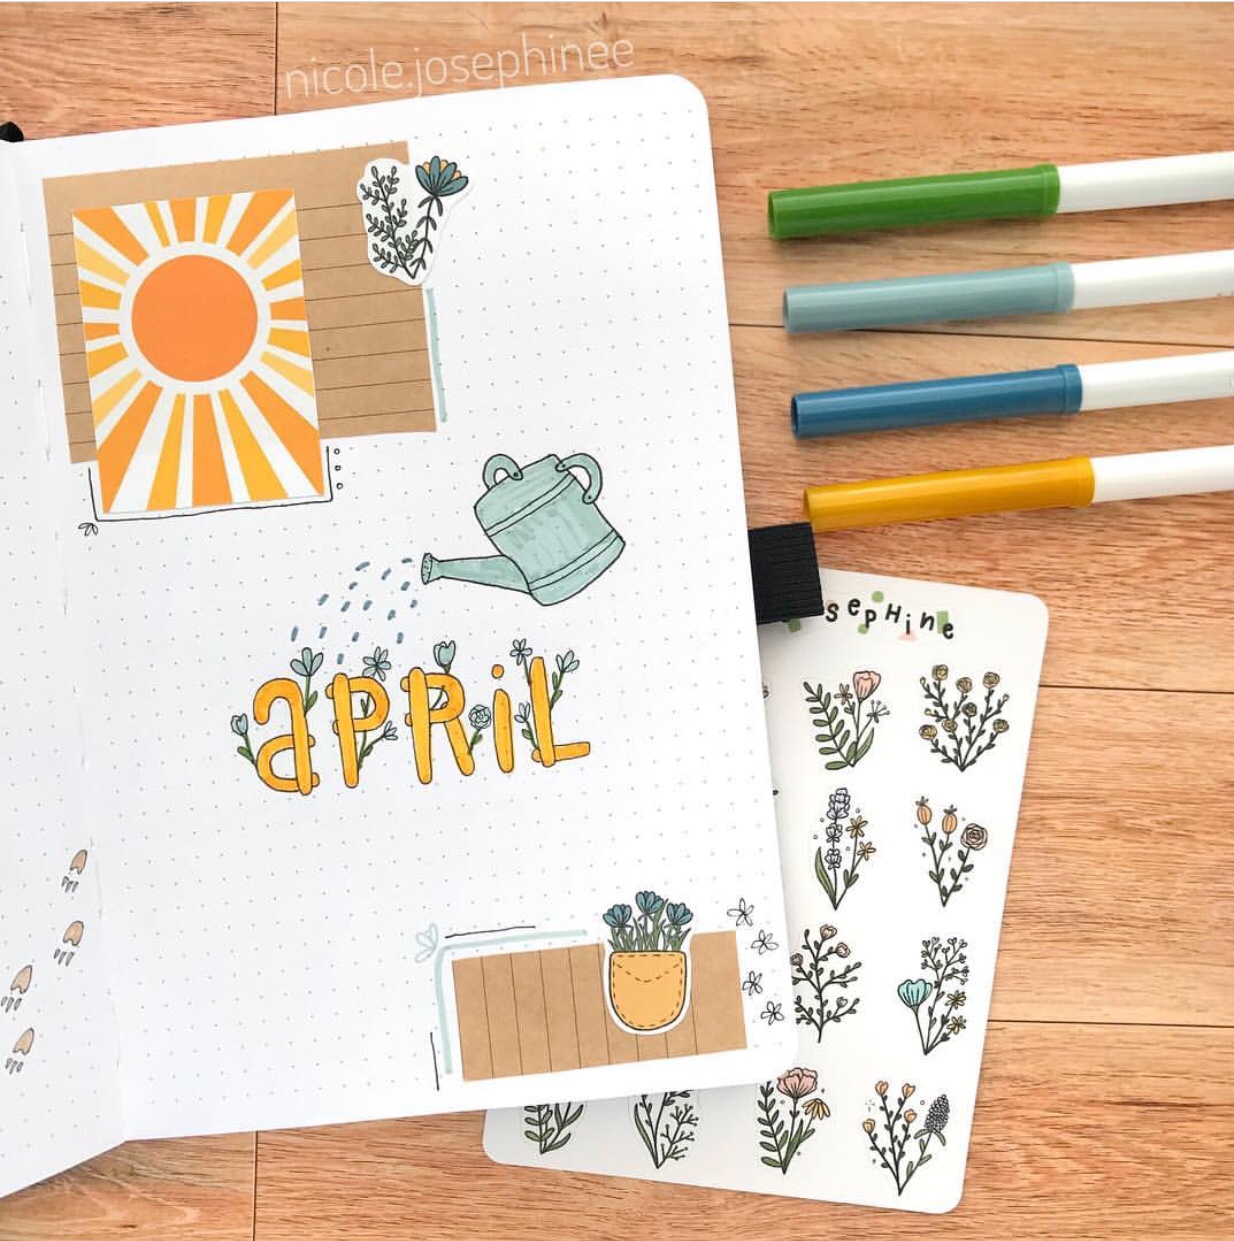 25 Wonderful April Bujo Spreads You Need to See - atinydreamer